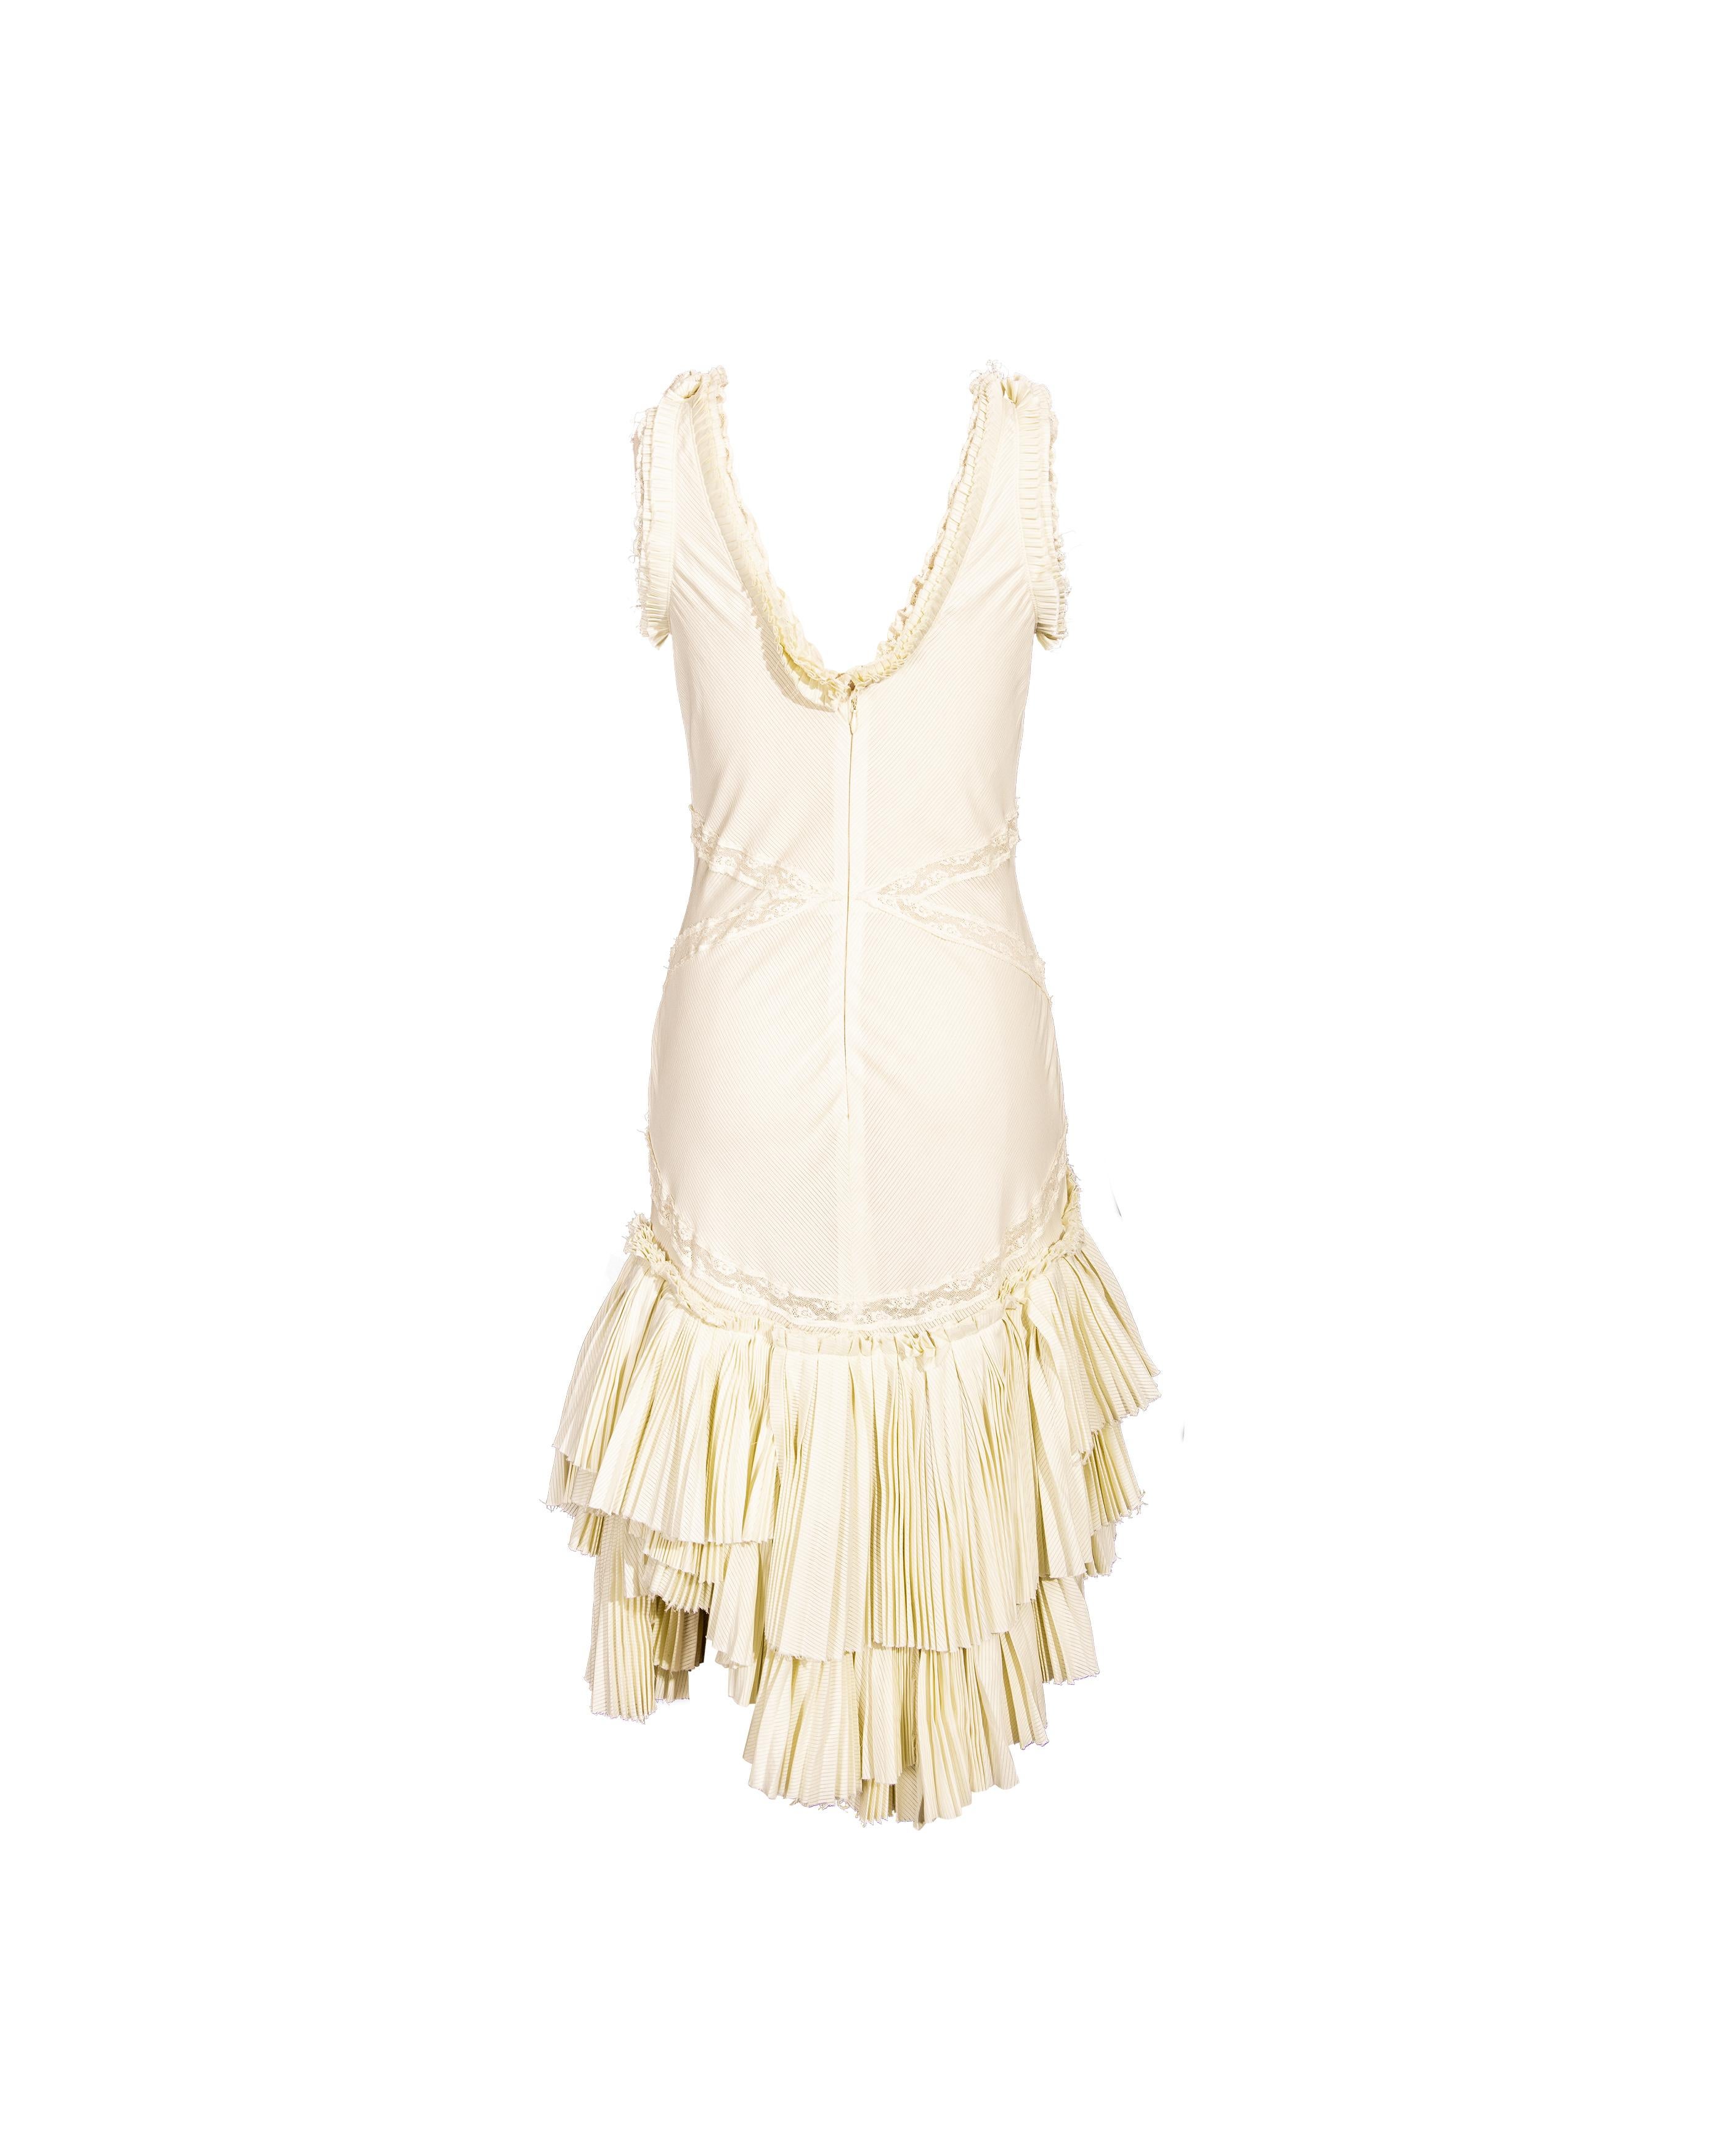 S/S 2005 Alexander McQueen (Lifetime) Pale Yellow Pleated and Lace Cotton Dress For Sale 1